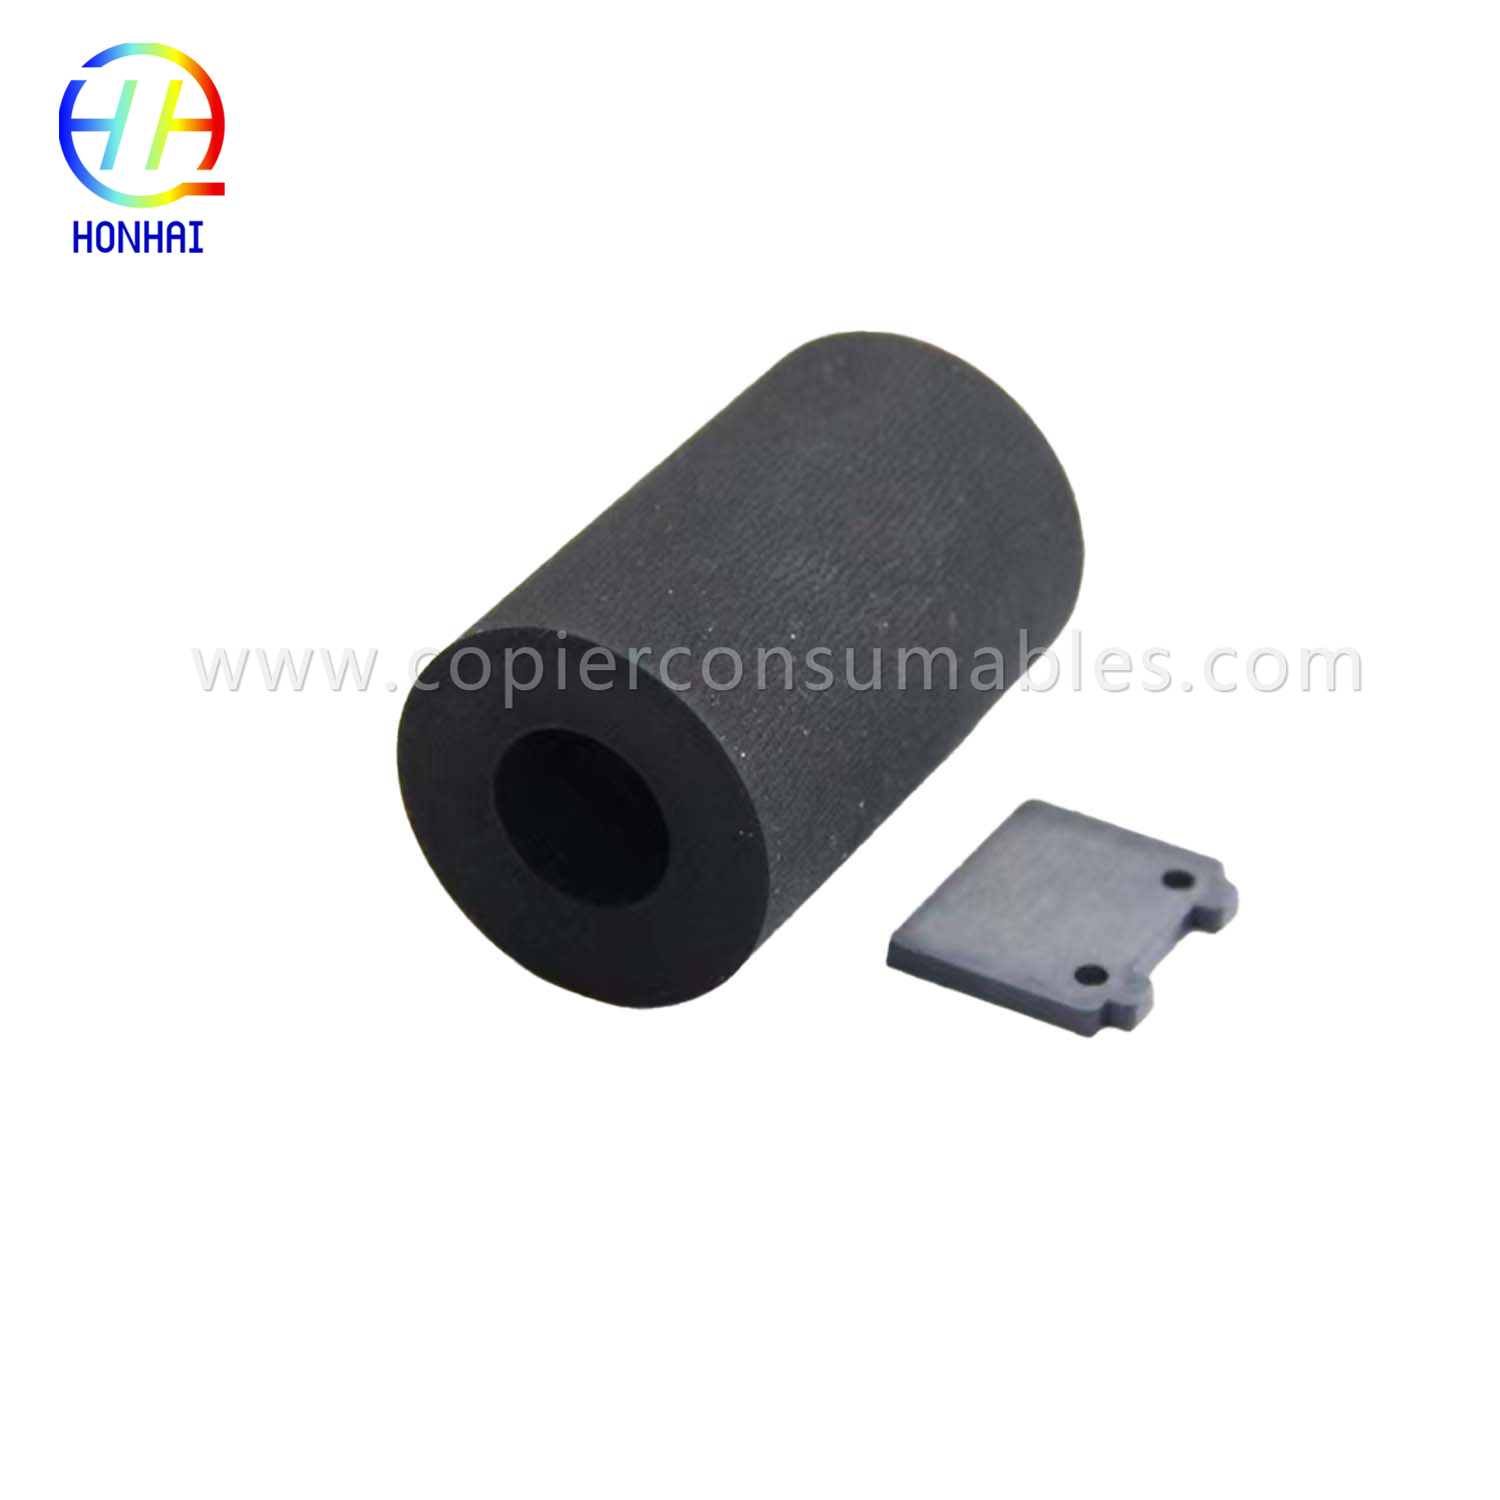 Adf Maintenance Roller Tire for HP Scanjet 3000 S2 L2724A